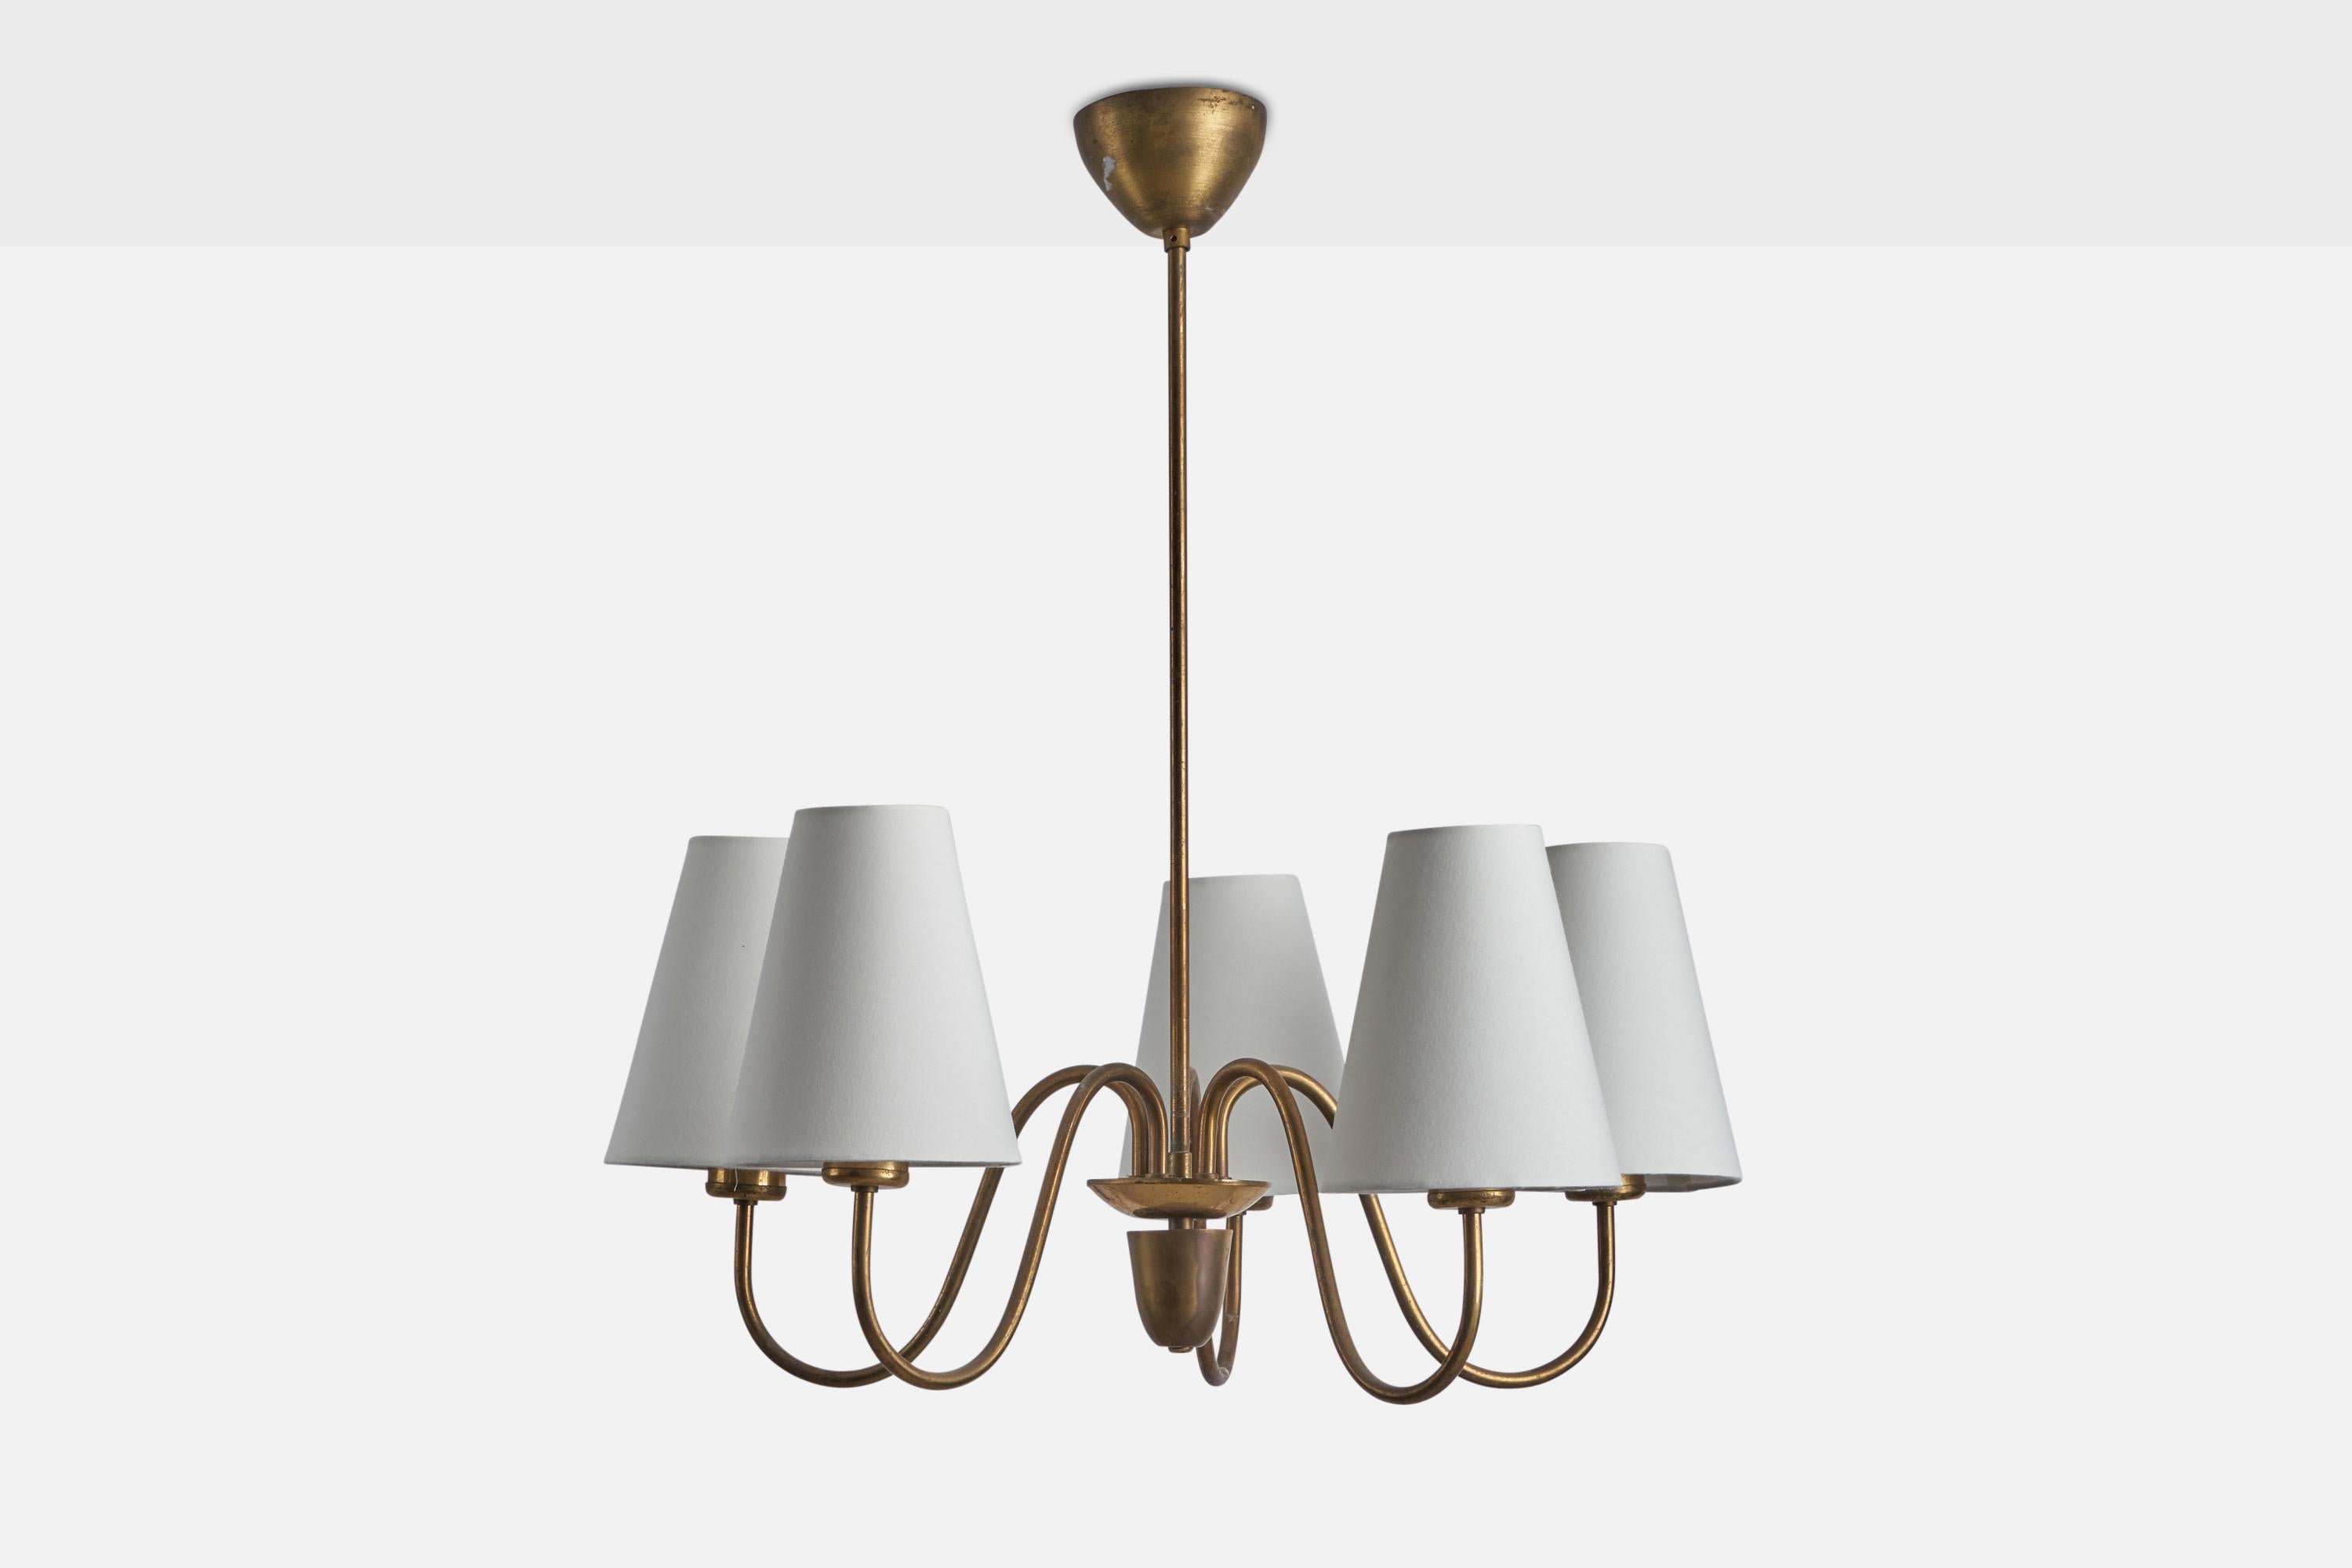 a five-armed brass and white fabric chandelier, designed and produced in Sweden, 1940s.

Overall Dimensions (inches): 26” H x 23” Diameter
Bulb Specifications: E-26 Bulb
Number of Sockets: 5